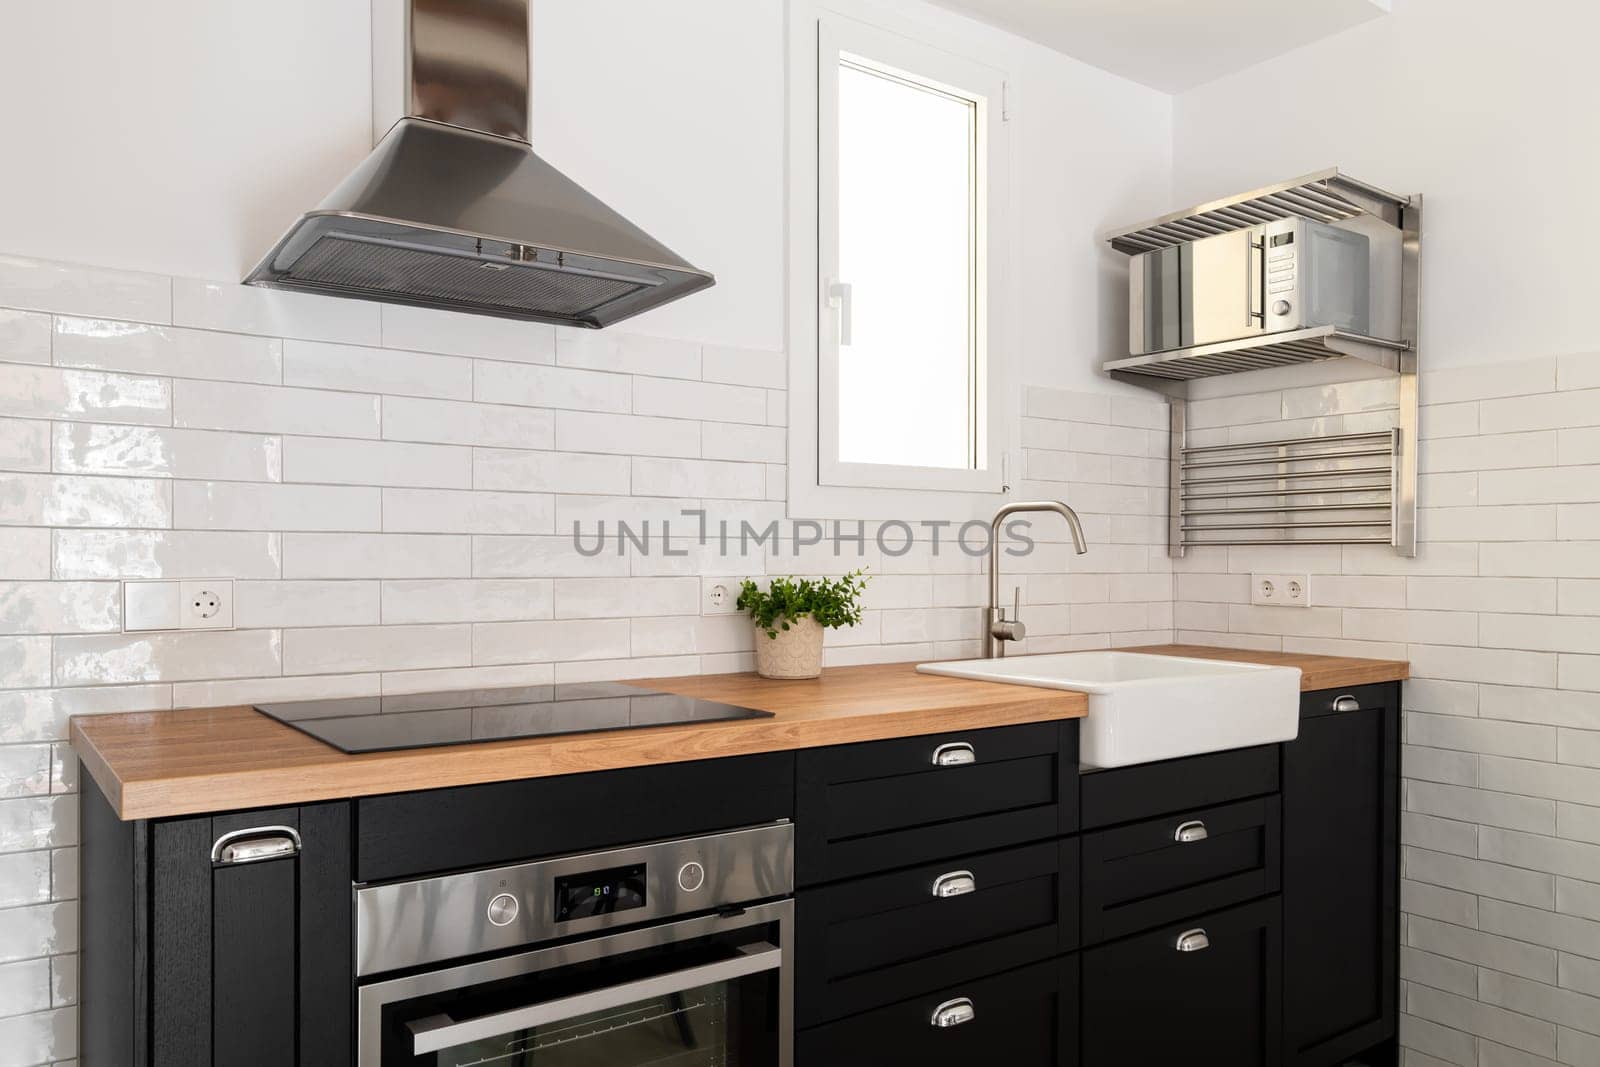 Comfortable and stylish kitchen in Scandinavian minimalist style with wooden countertops and black fronts on the background of white tiles. Kitchen concept in modern European residential complexes by apavlin